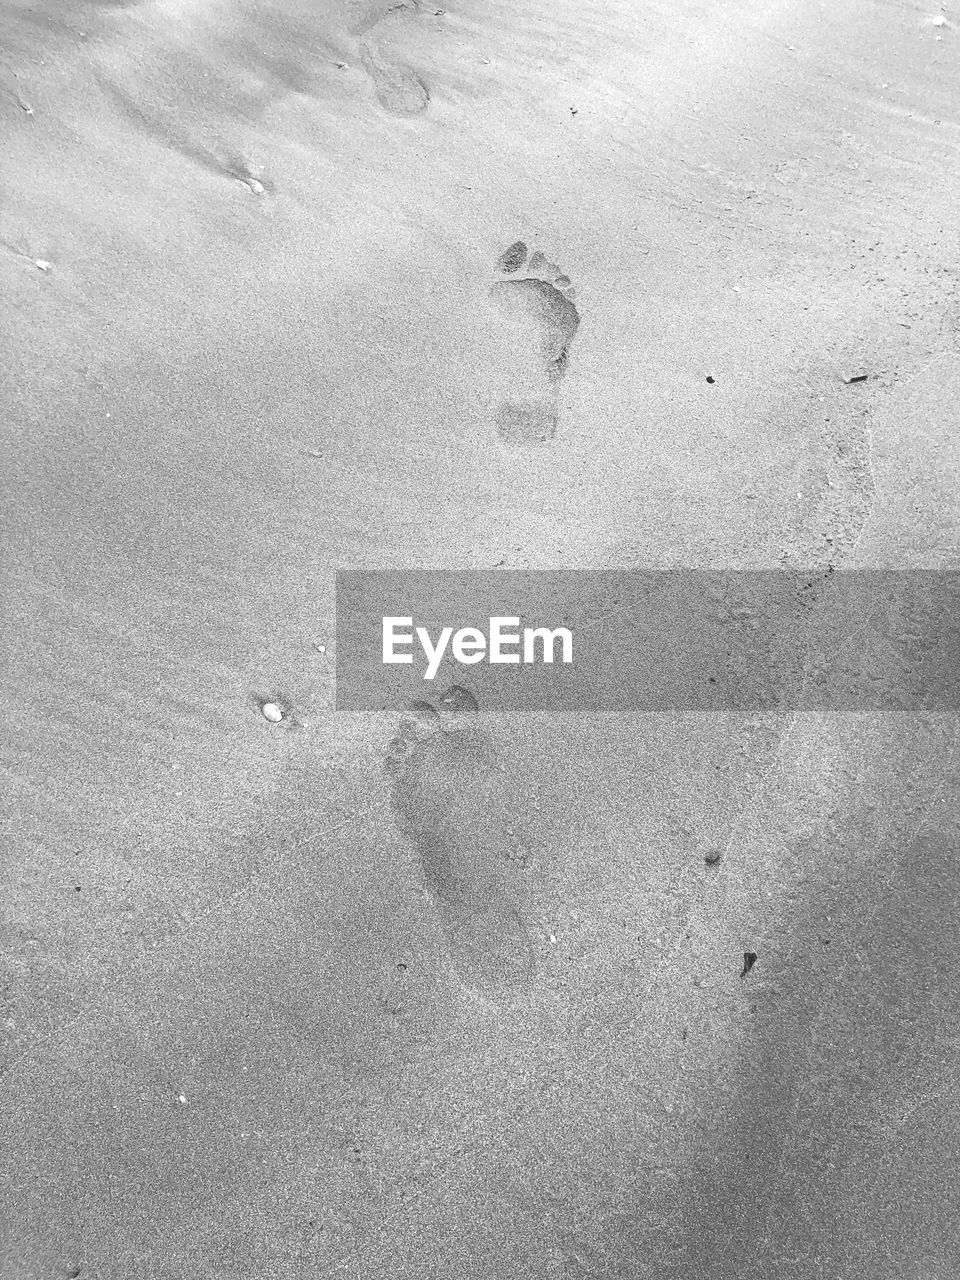 HIGH ANGLE VIEW OF FOOTPRINTS ON BEACH